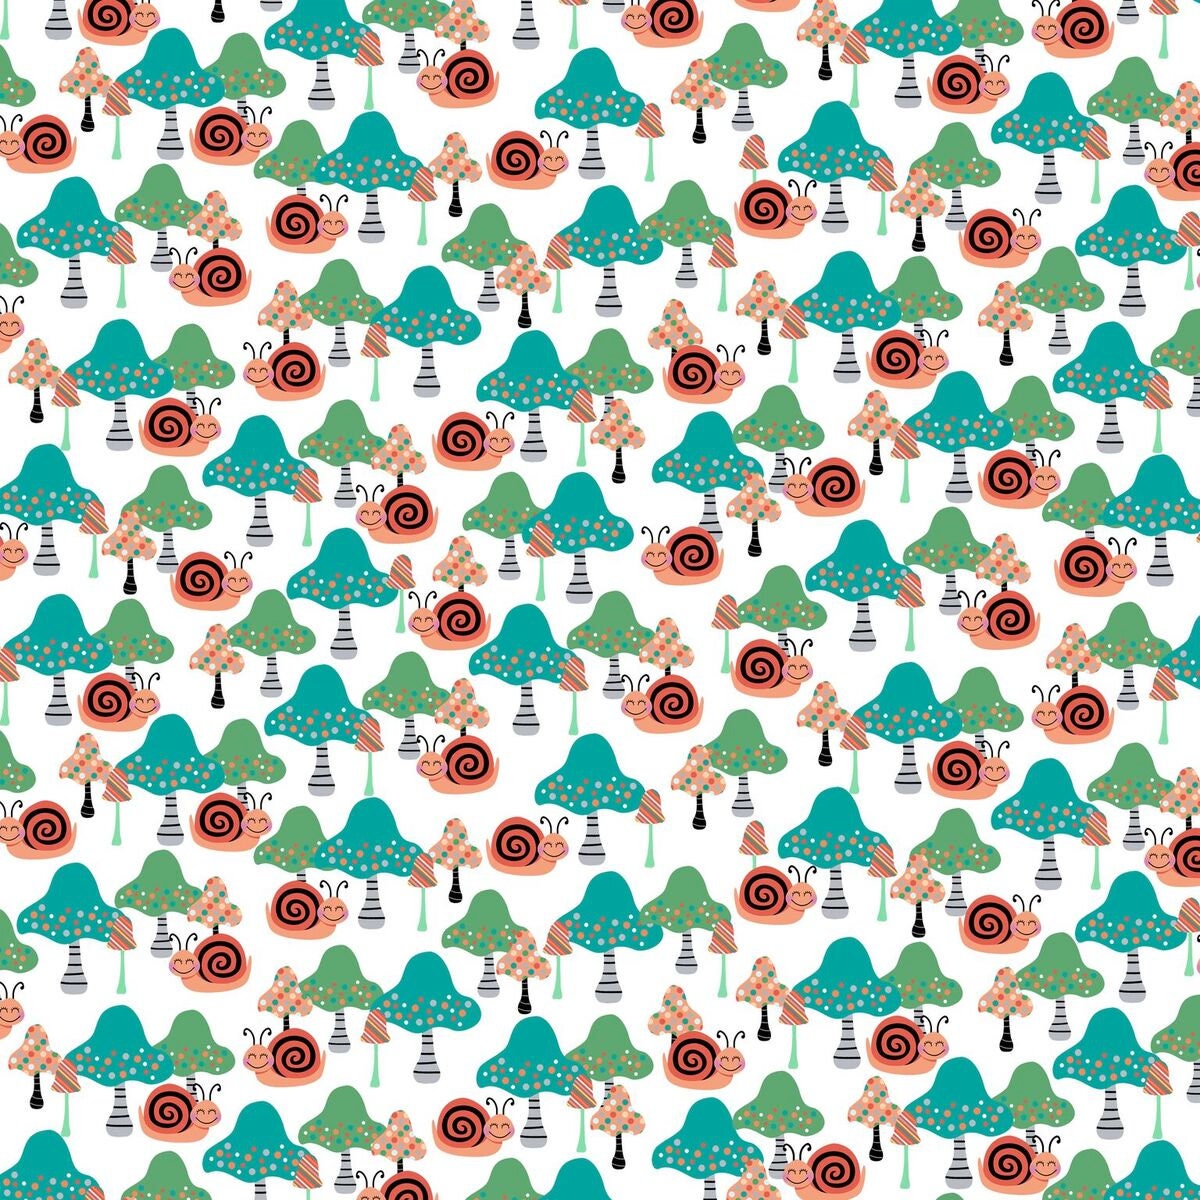 Owl's Woodland Adventure by Sharla Fults Mushrooms and Snails 5076-6-Multi Cotton Woven Fabric